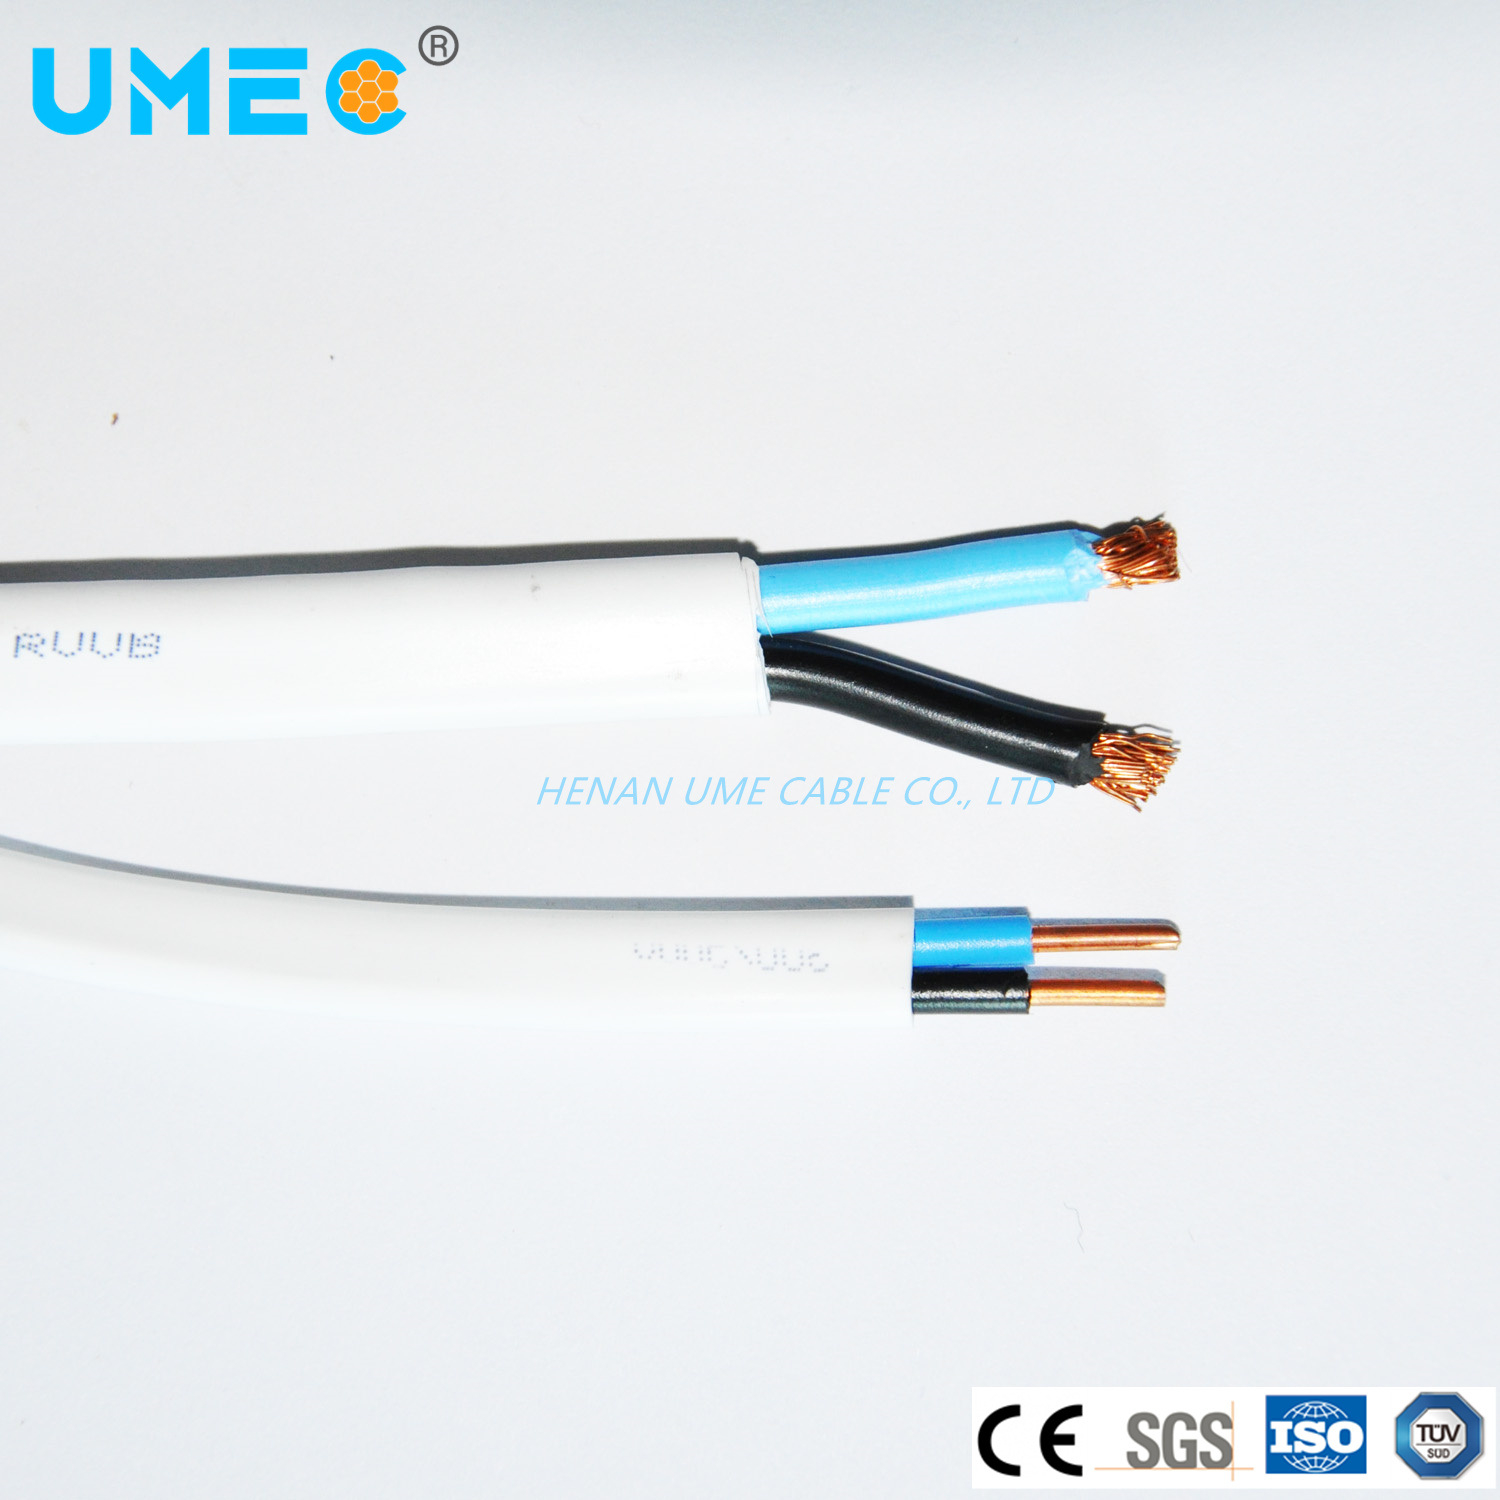 Domestic BS 6360 Class 1 or 2 Stranded/Solid Copper Wire PVC Insulated PVC Jacket BVVB TPS